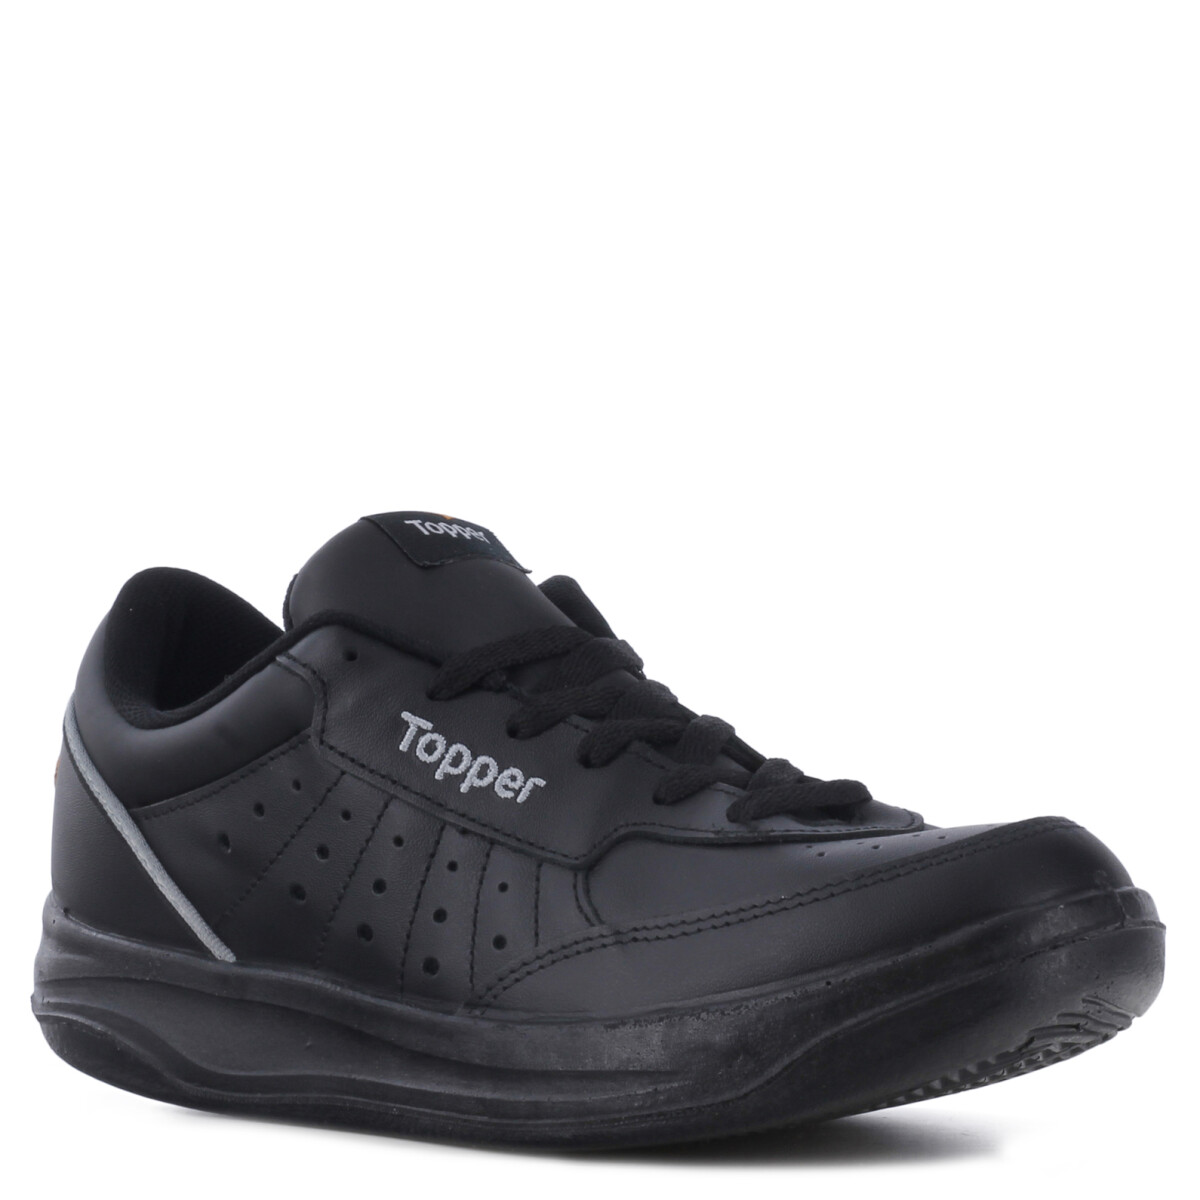 X Forcer Topper - Negro 